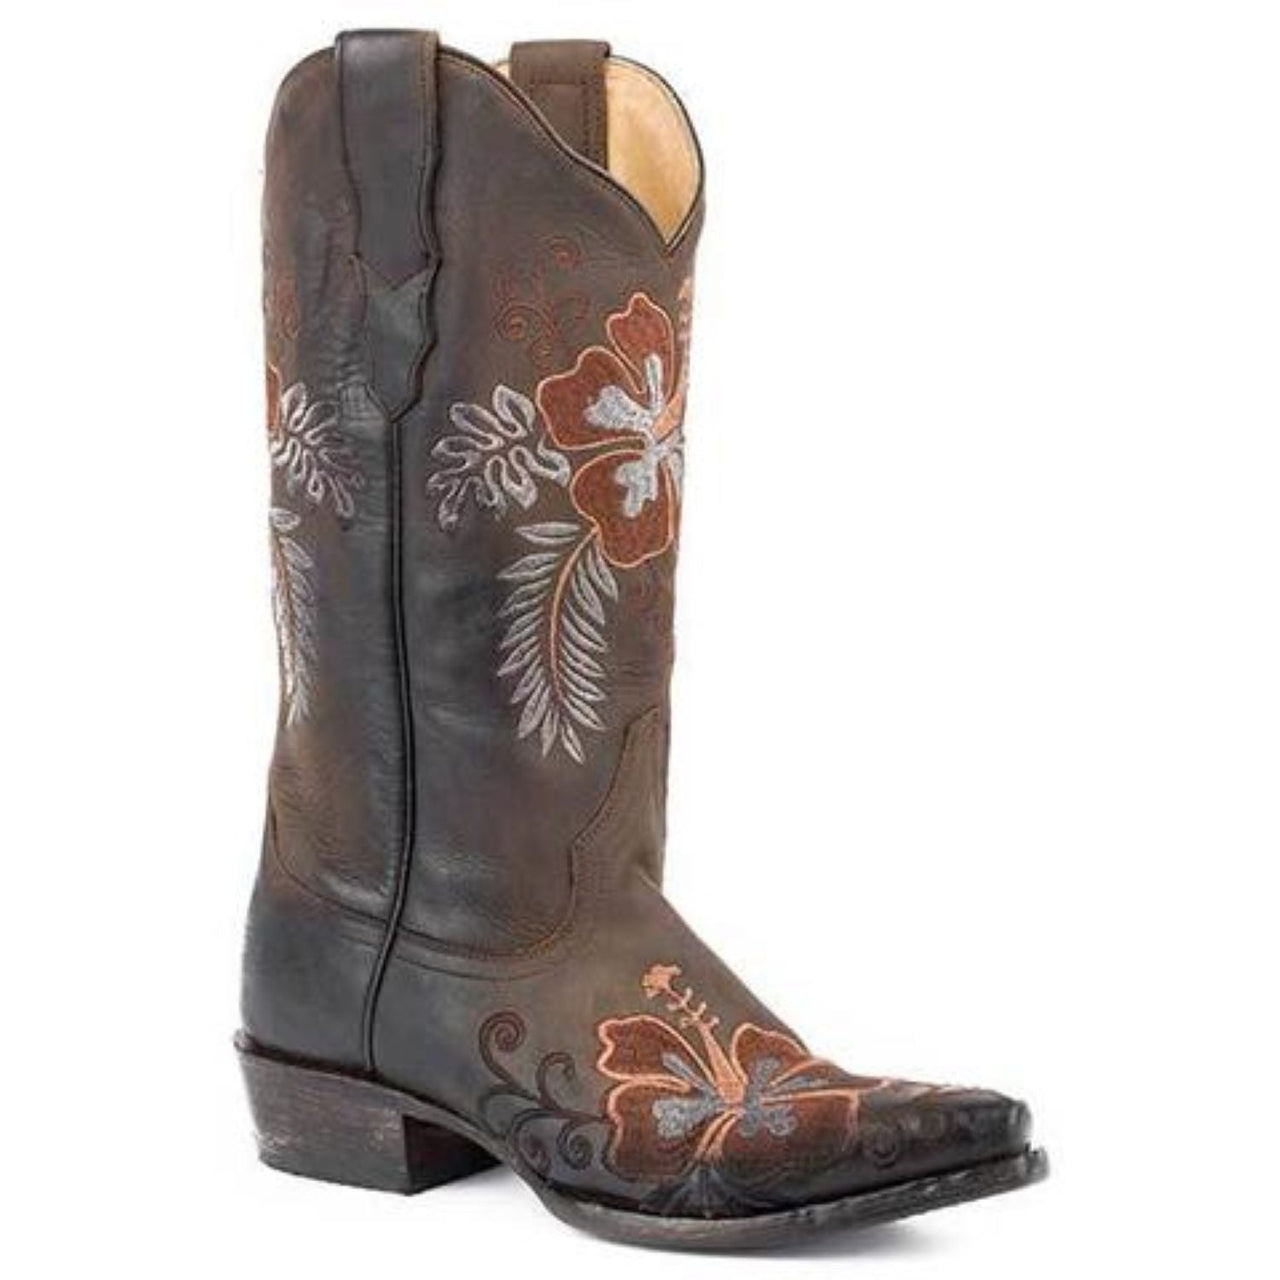 Women's Stetson Aloha Leather Boots Handcrafted Brown - yeehawcowboy